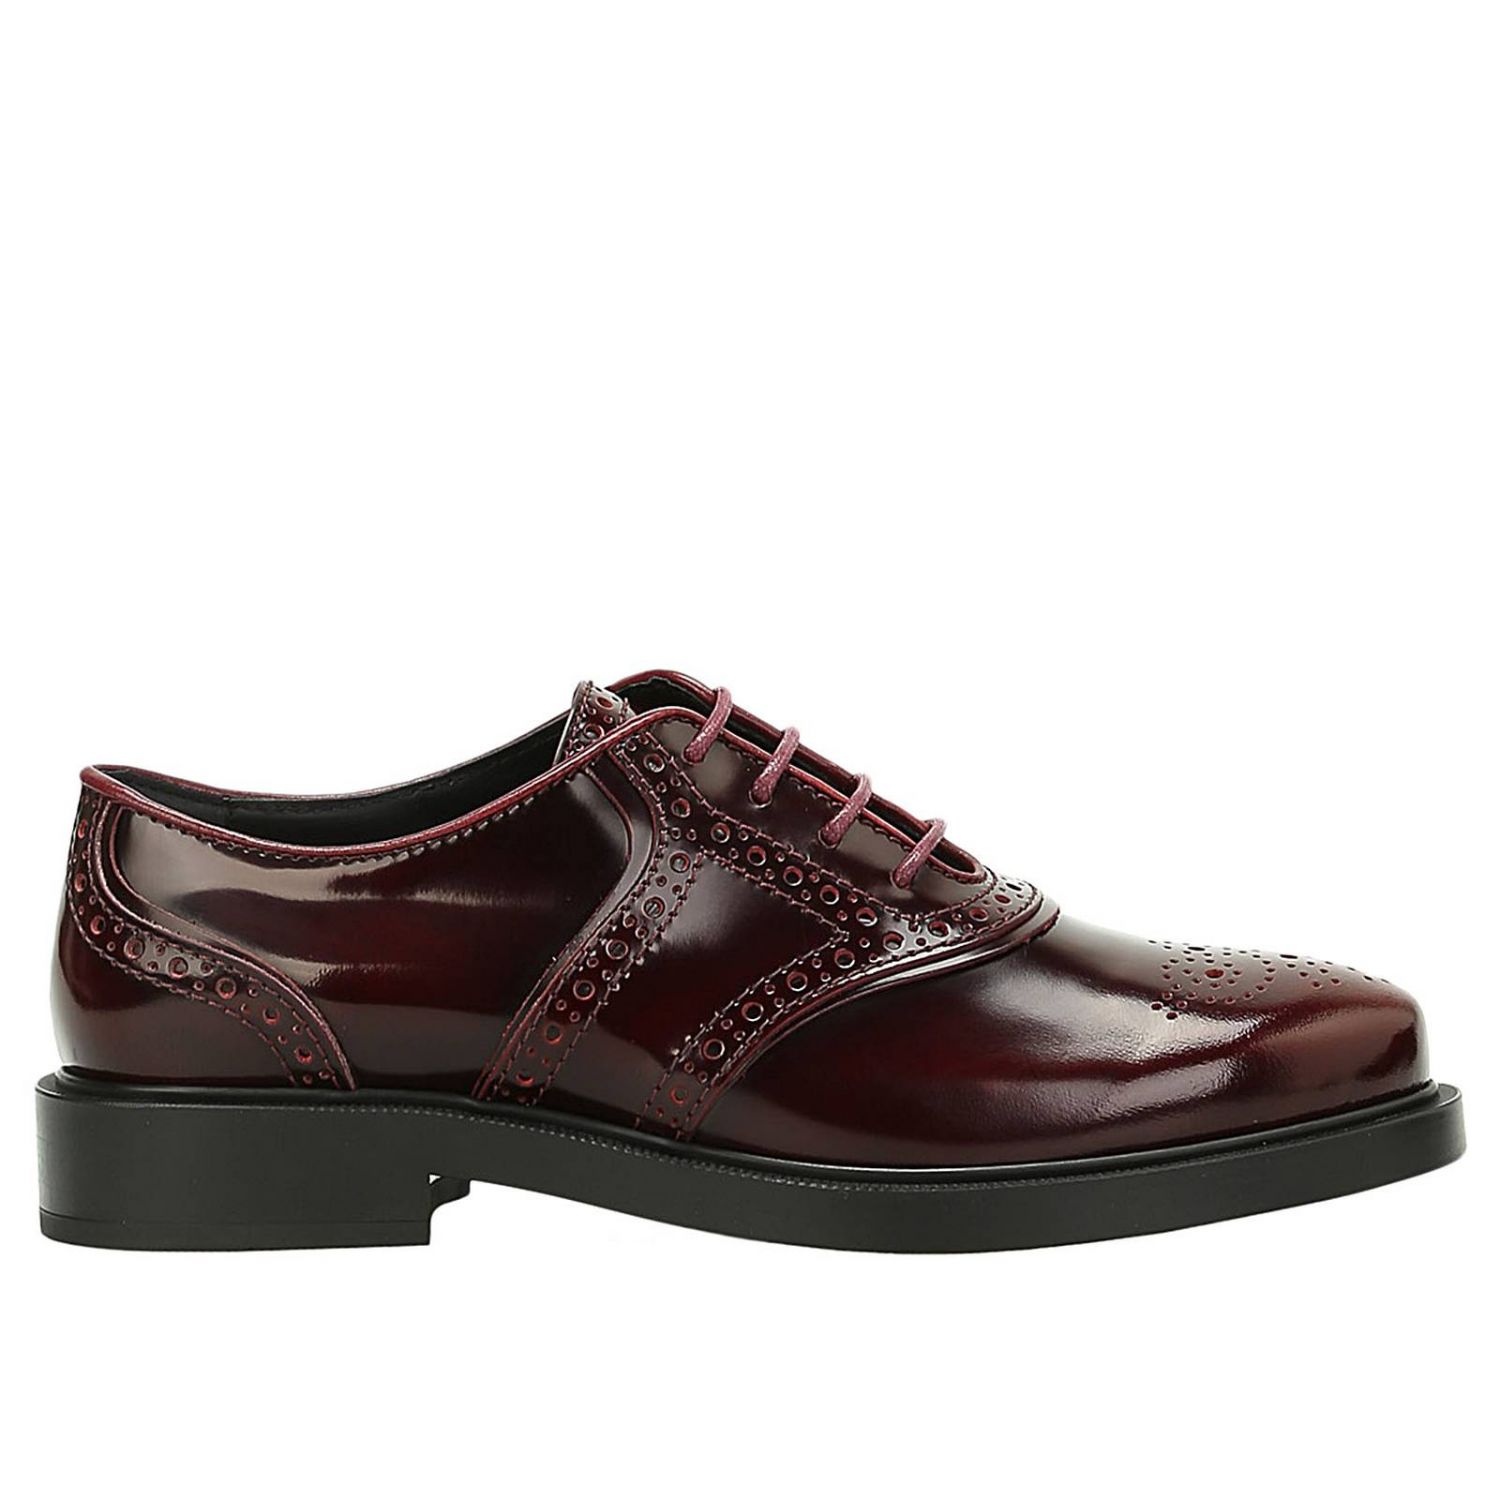 Shoes women Tod's | Brogues Tods Women Burgundy | Brogues Tods ...